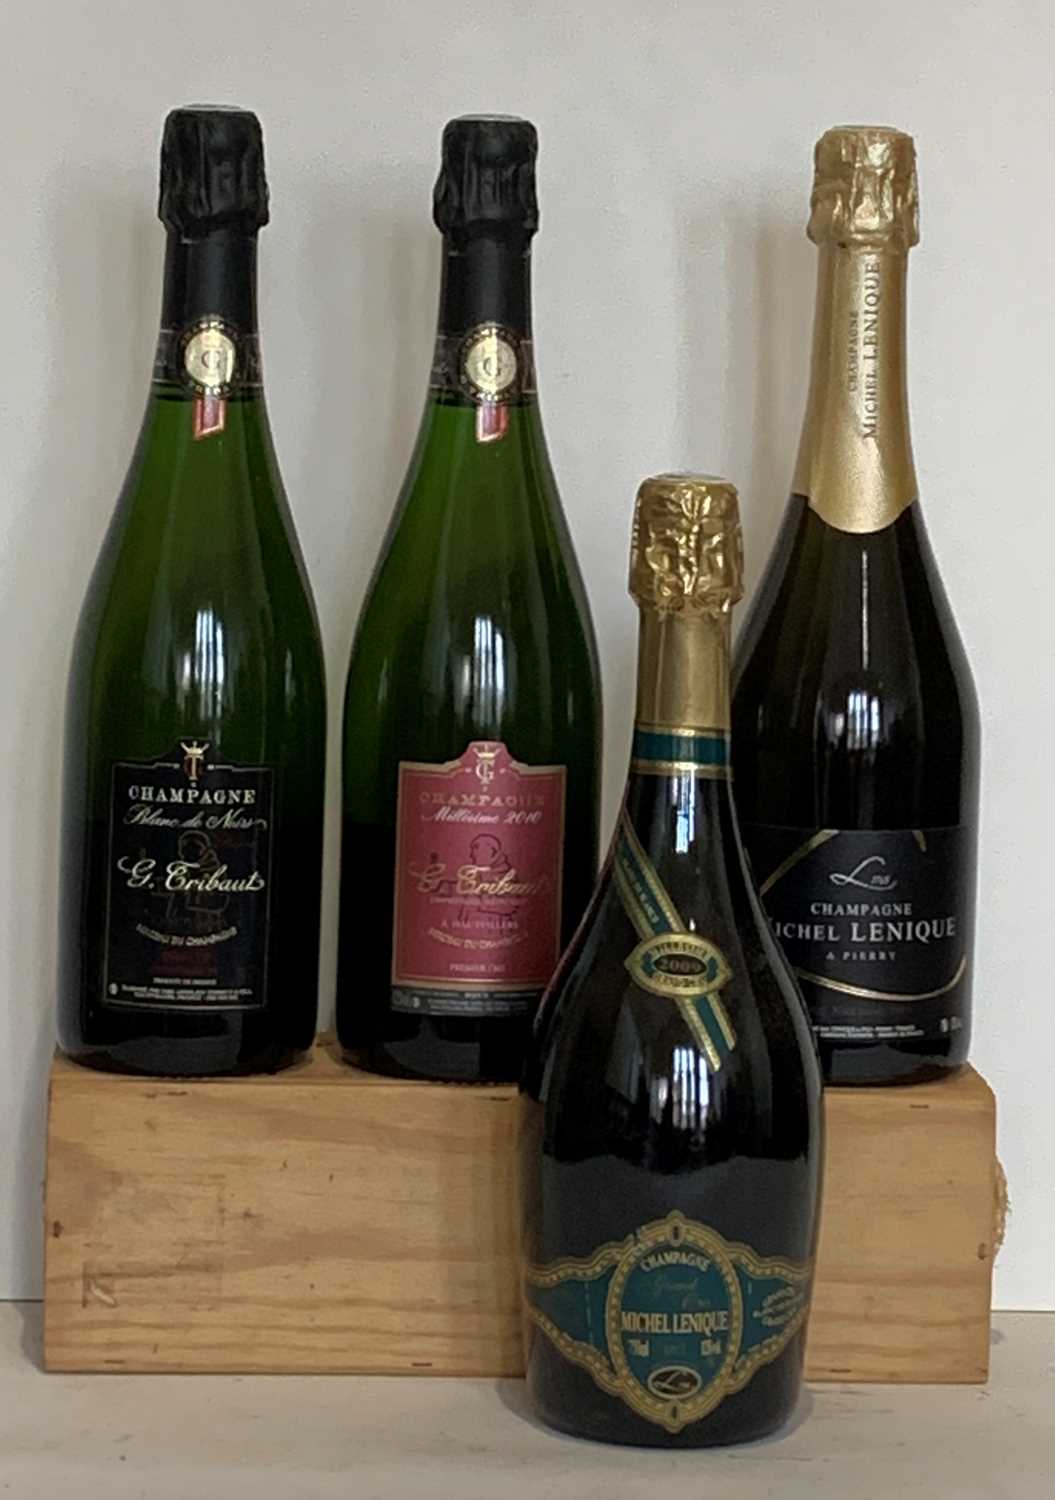 Lot 32 - 4 Bottles Mixed Lot Fine and Vintage Grower Champagne